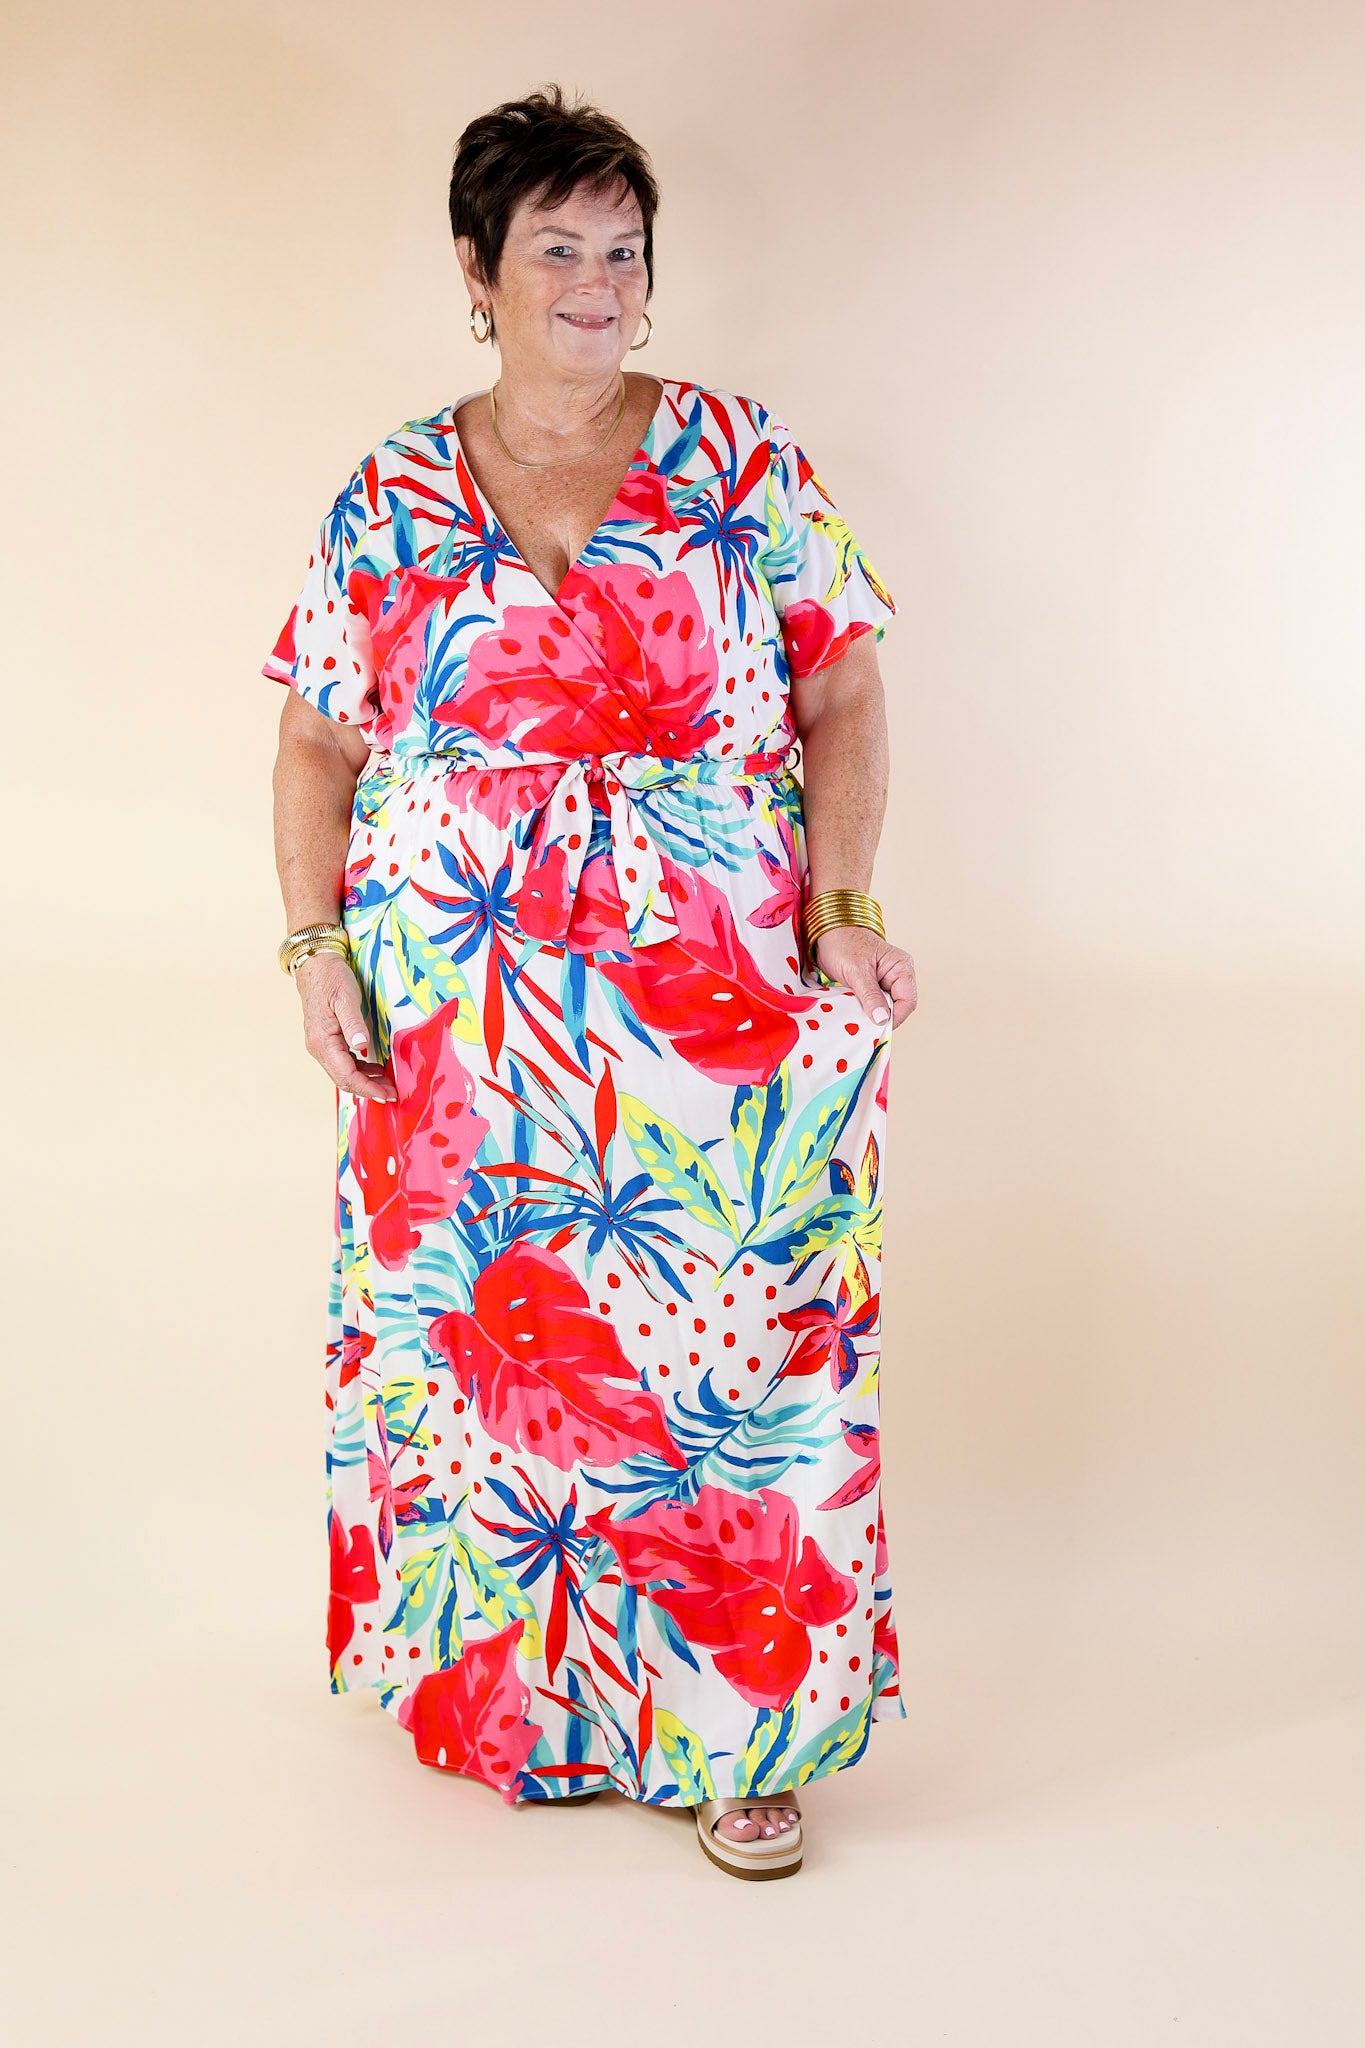 Delightful Dip Tropical Floral Maxi Dress with Waist Tie in White